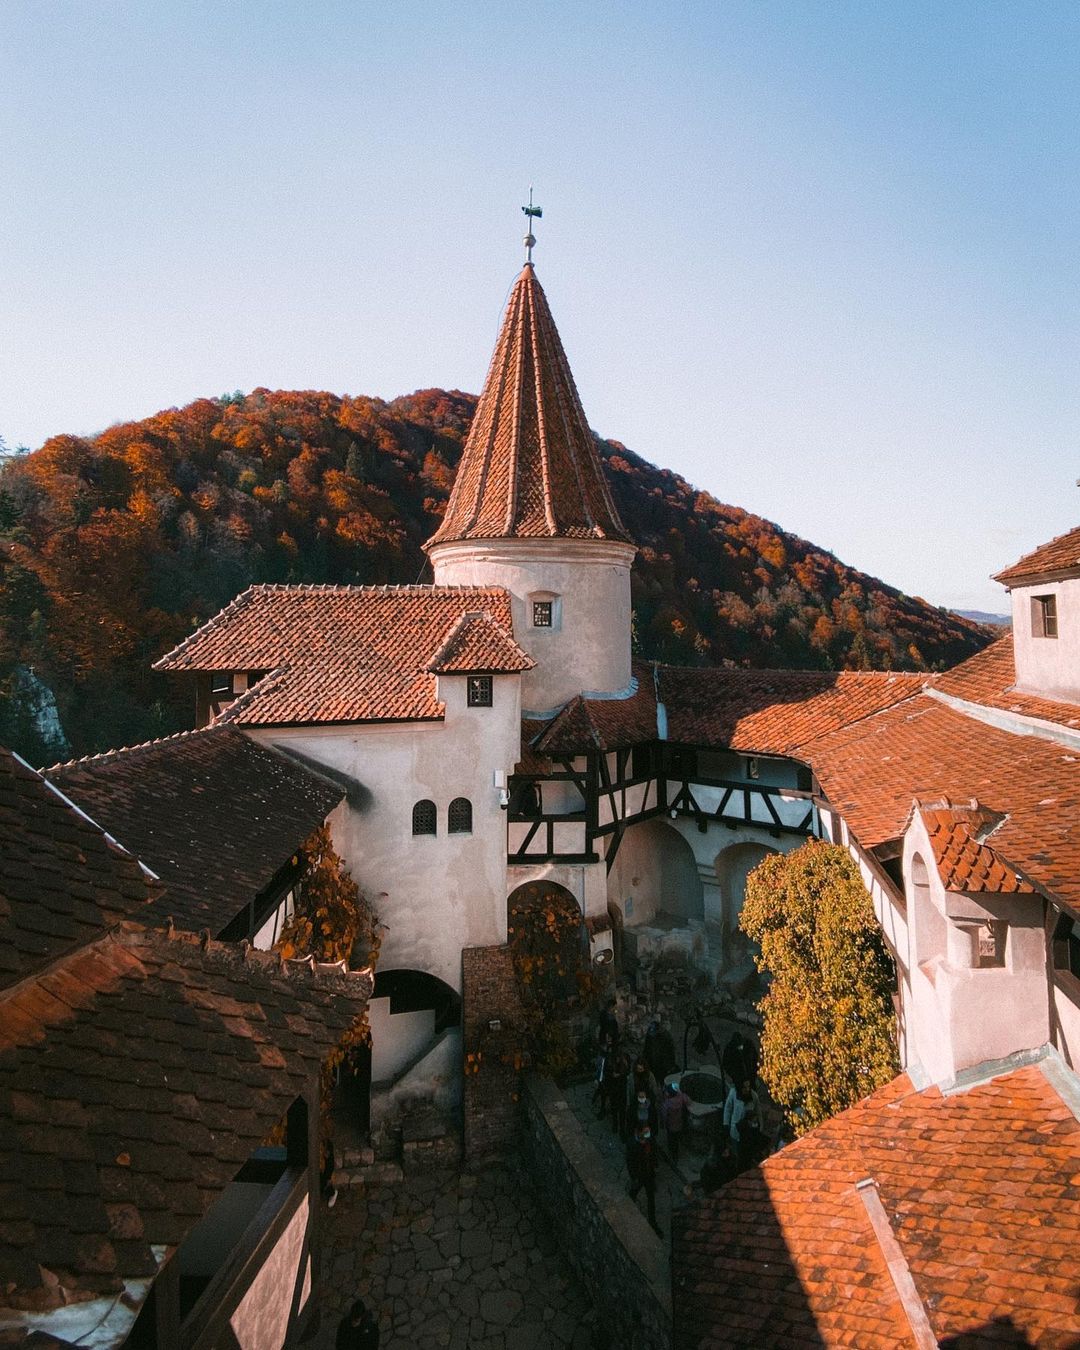 Bran Castle, Transylvania - 30 Trips to Take in Your 30s